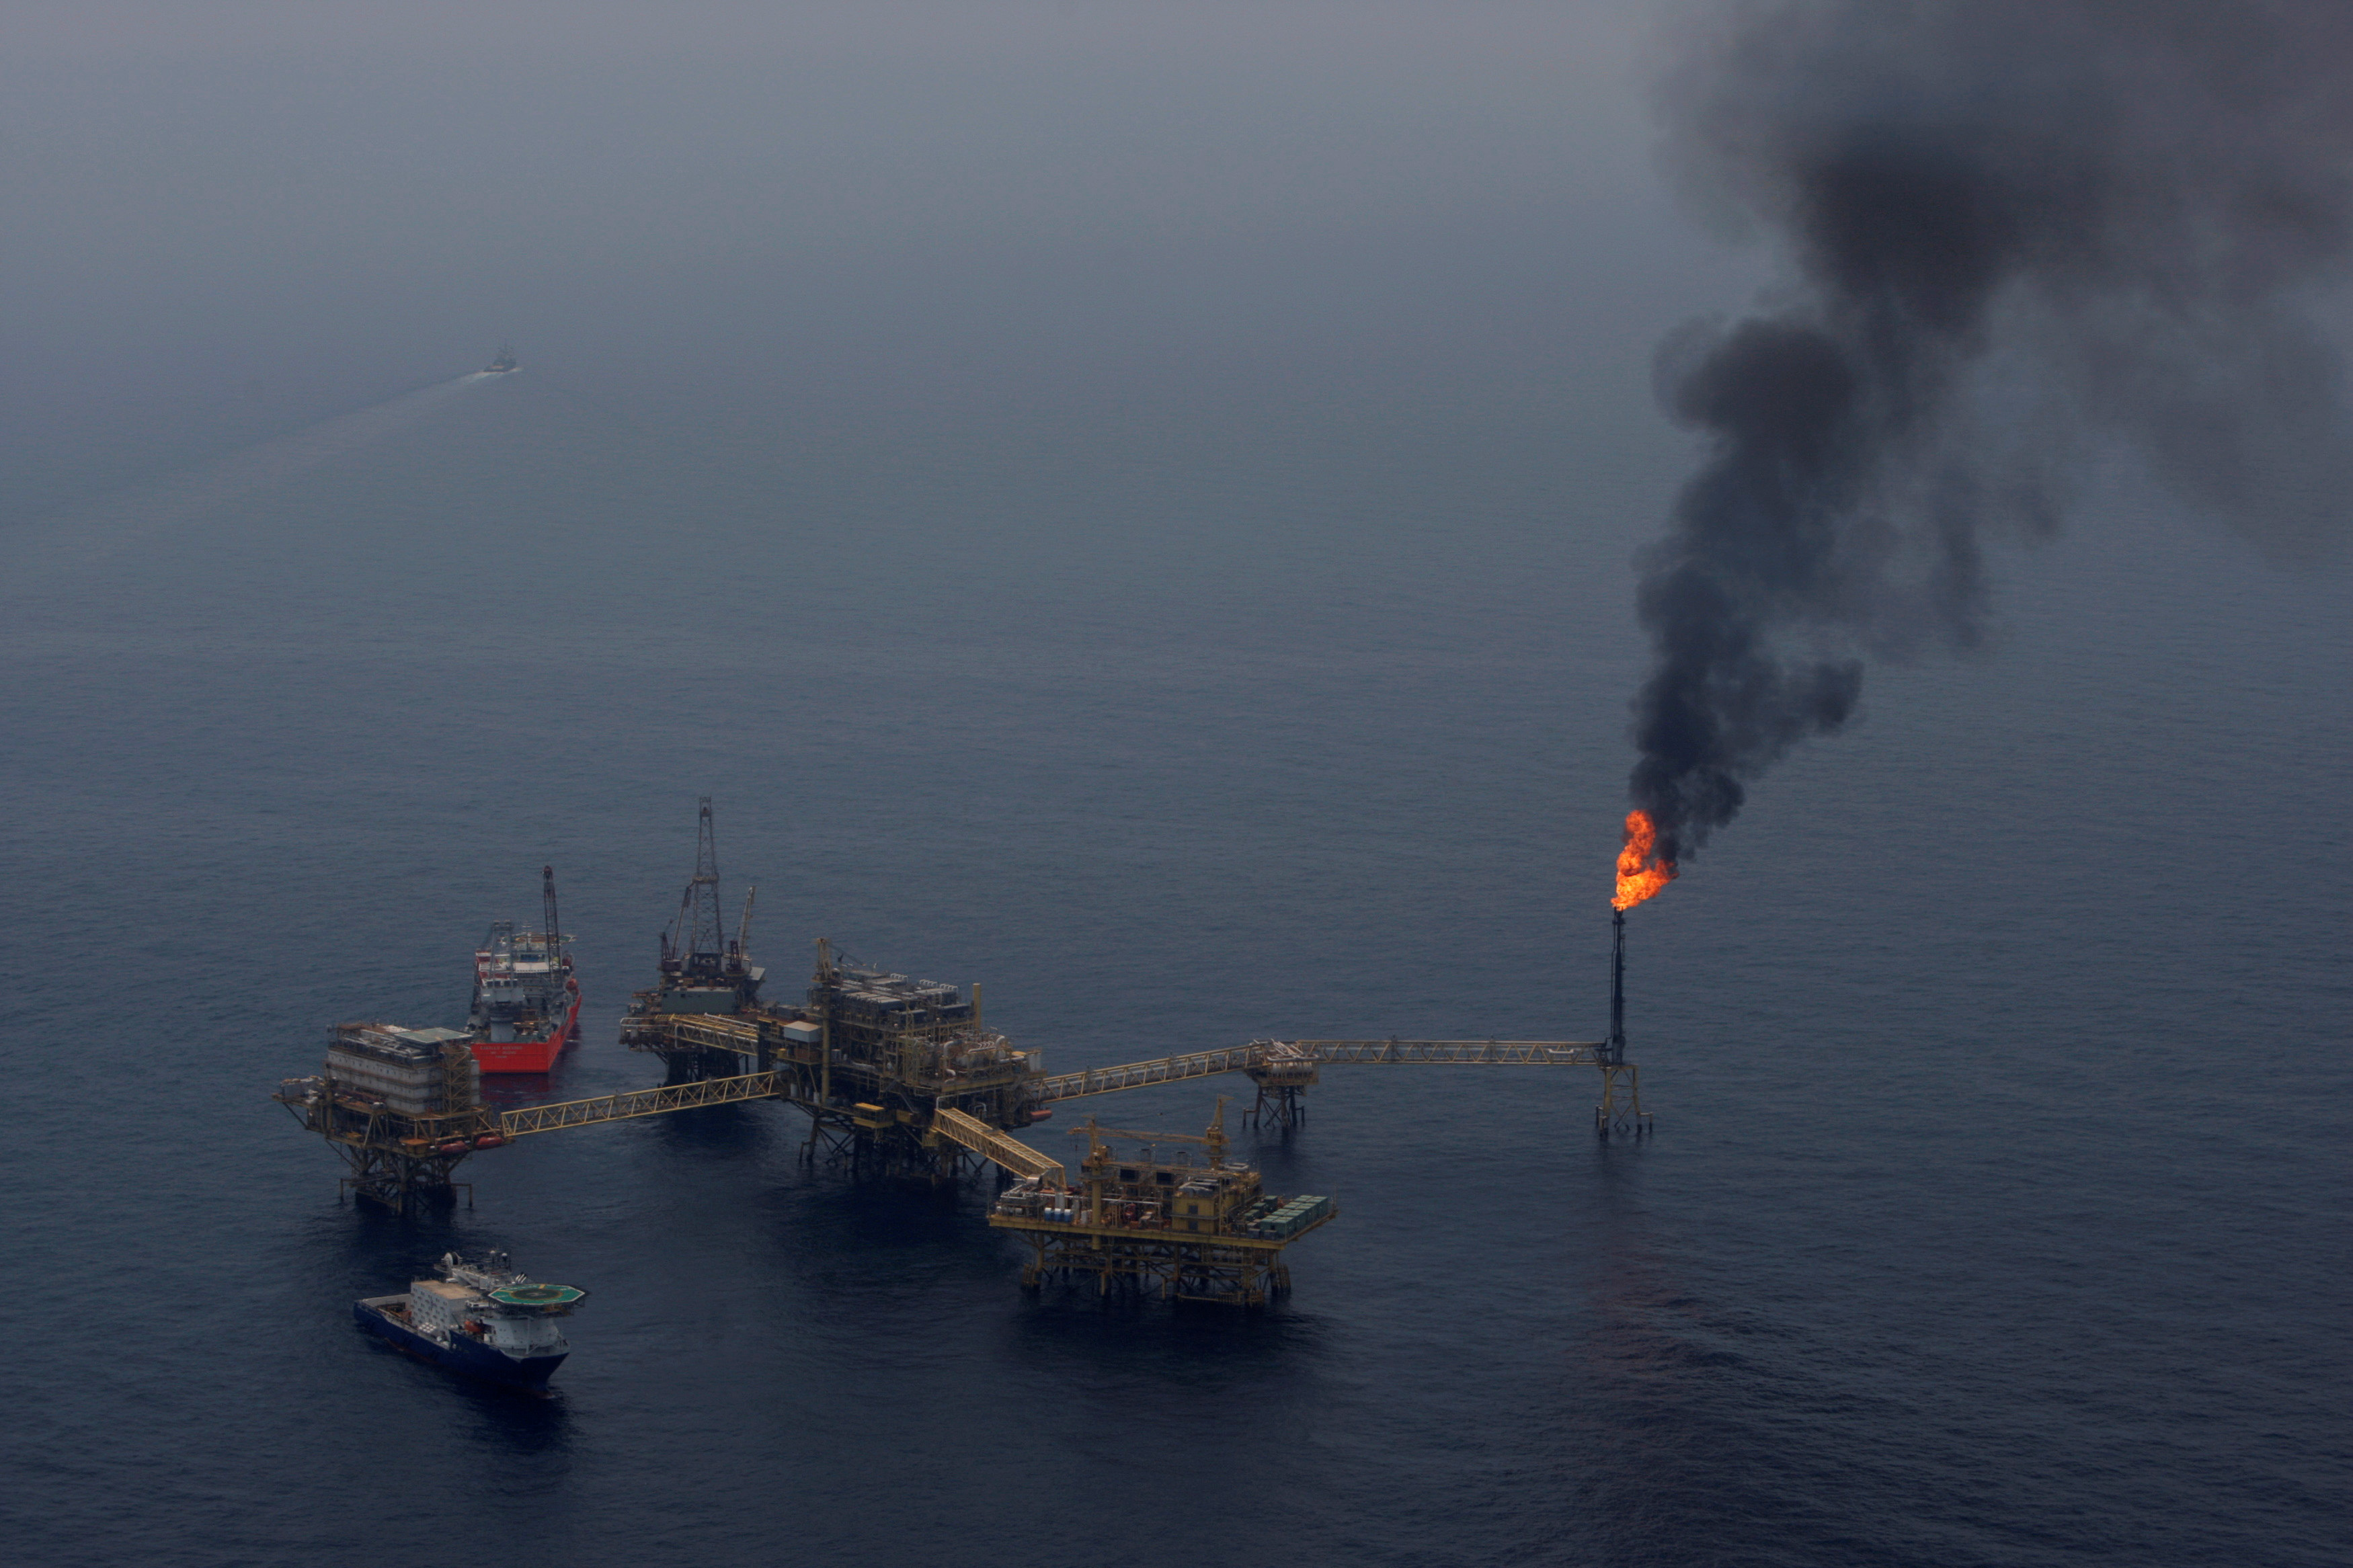 Gas flaring is seen at a Pemex platform that forms part of the Ku Maloob Zaap oil field cluster, in the northeast marine region in the Bay of Campeche April 19, 2013. REUTERS/Victor Ruiz Garcia/